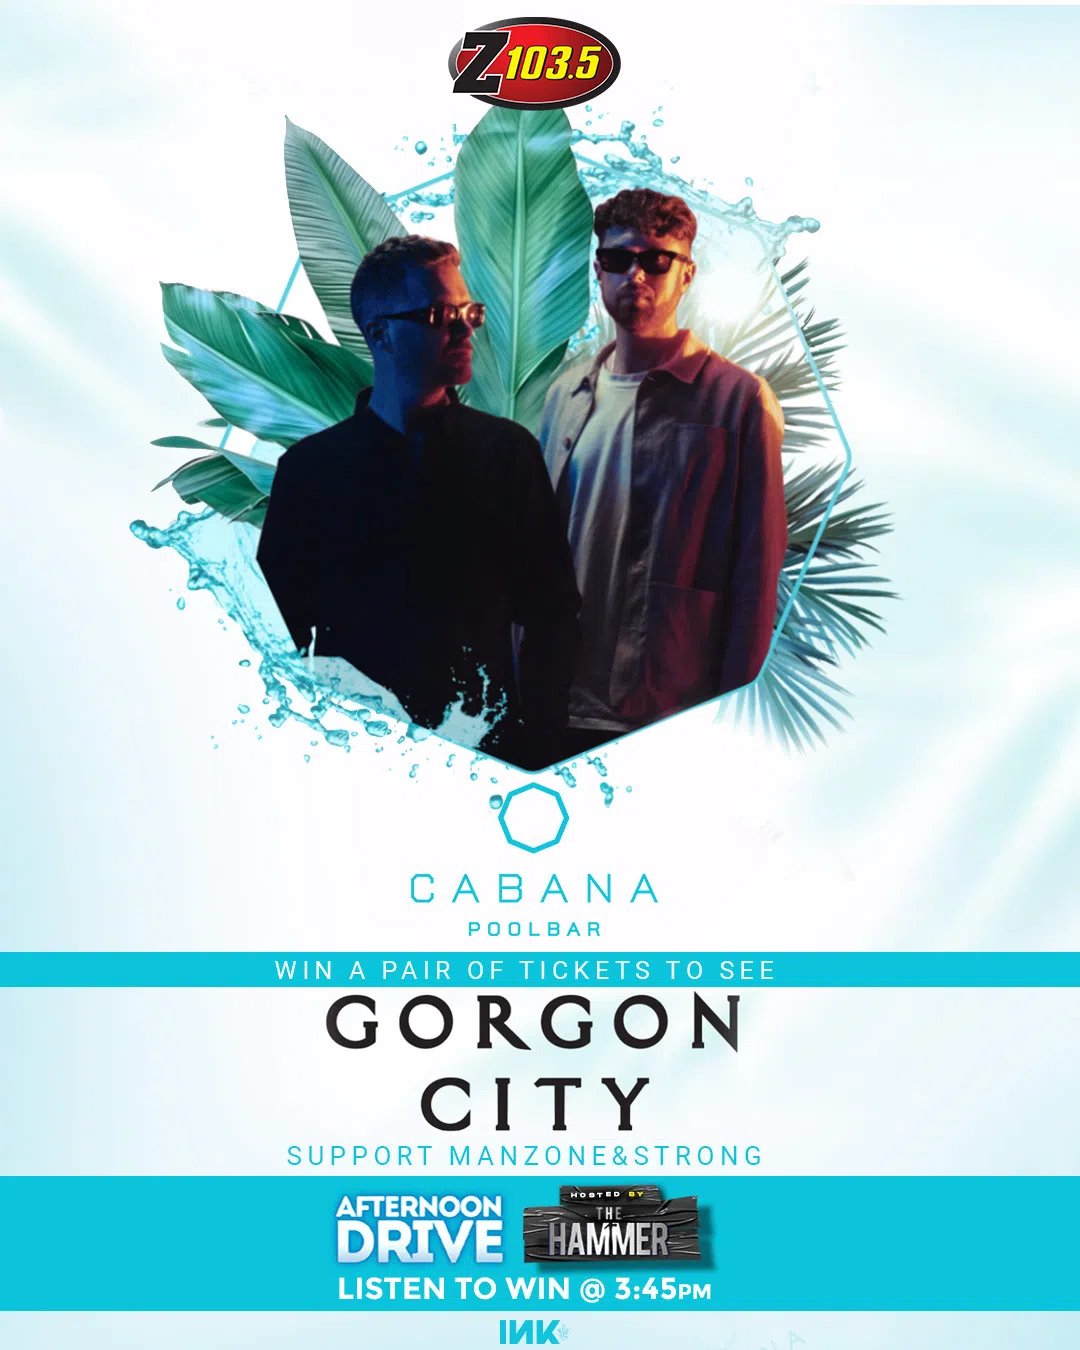 Feature: https://z1035.com/win/win-tickets-to-cabana-pool-bar-to-see-gorgon-city/